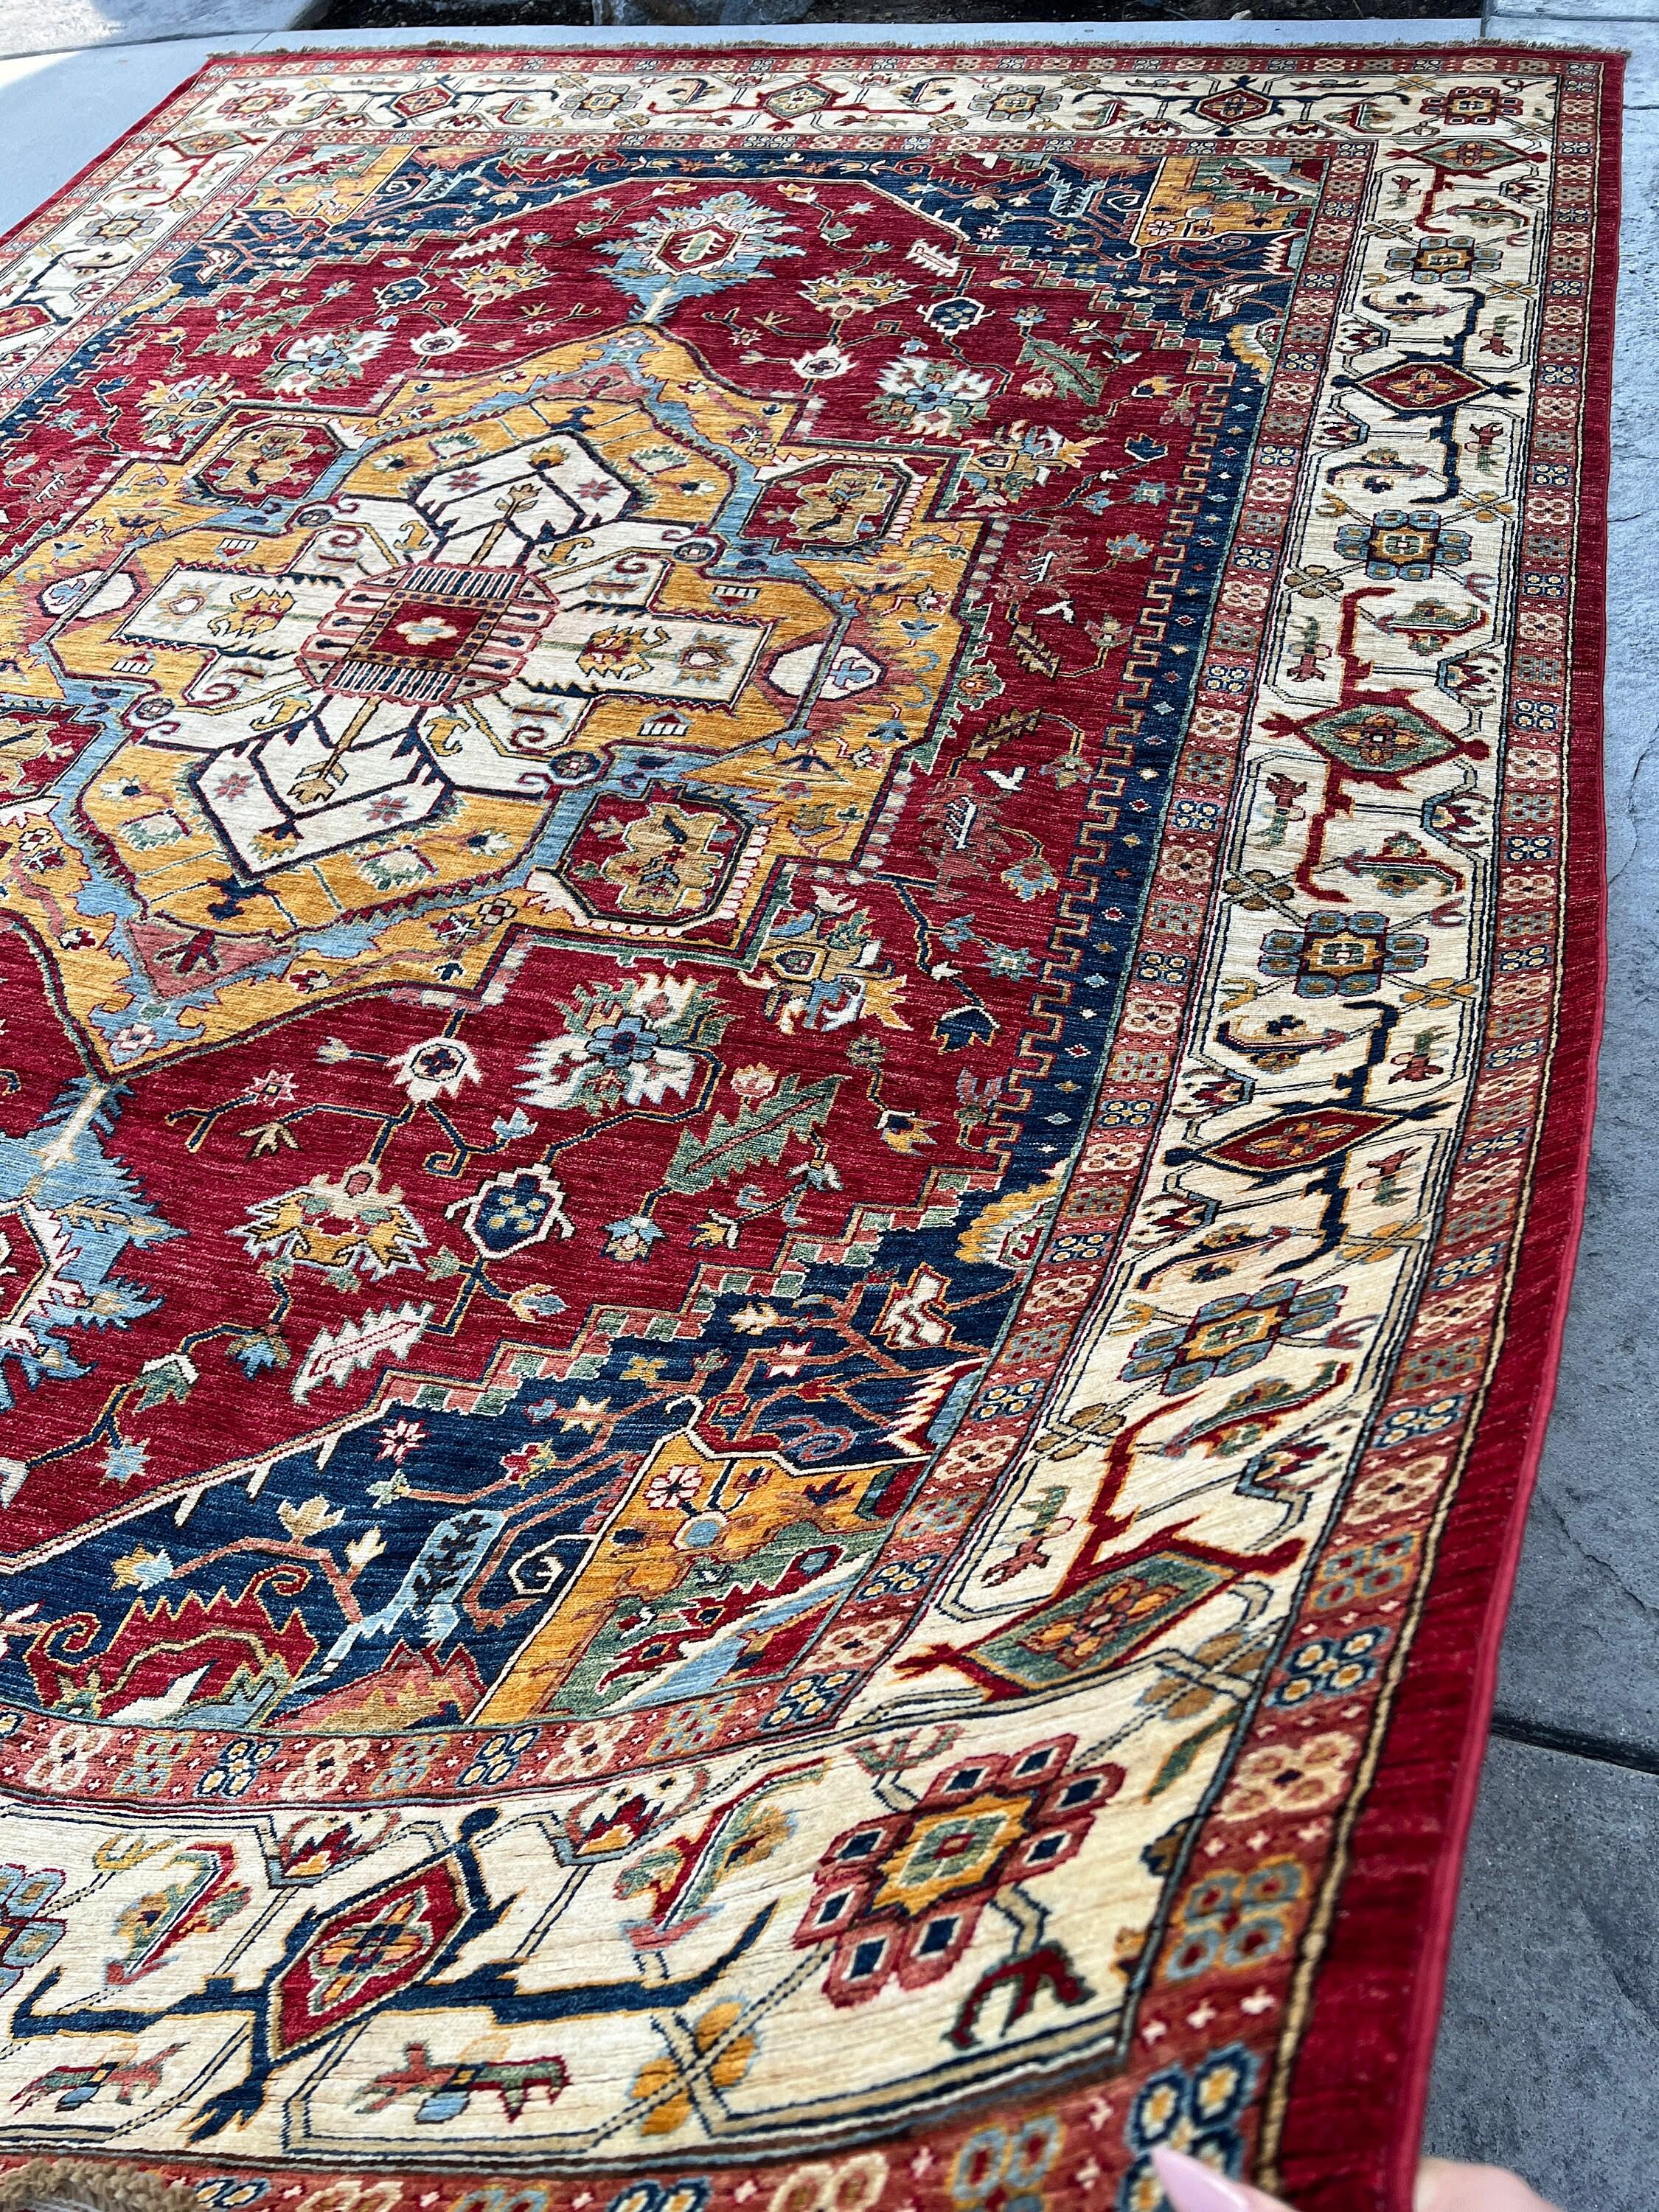 Contemporary 9x12 Hand-Knotted Afghan Rug Premium Hand-Spun Afghan Wool Fair Trade For Sale